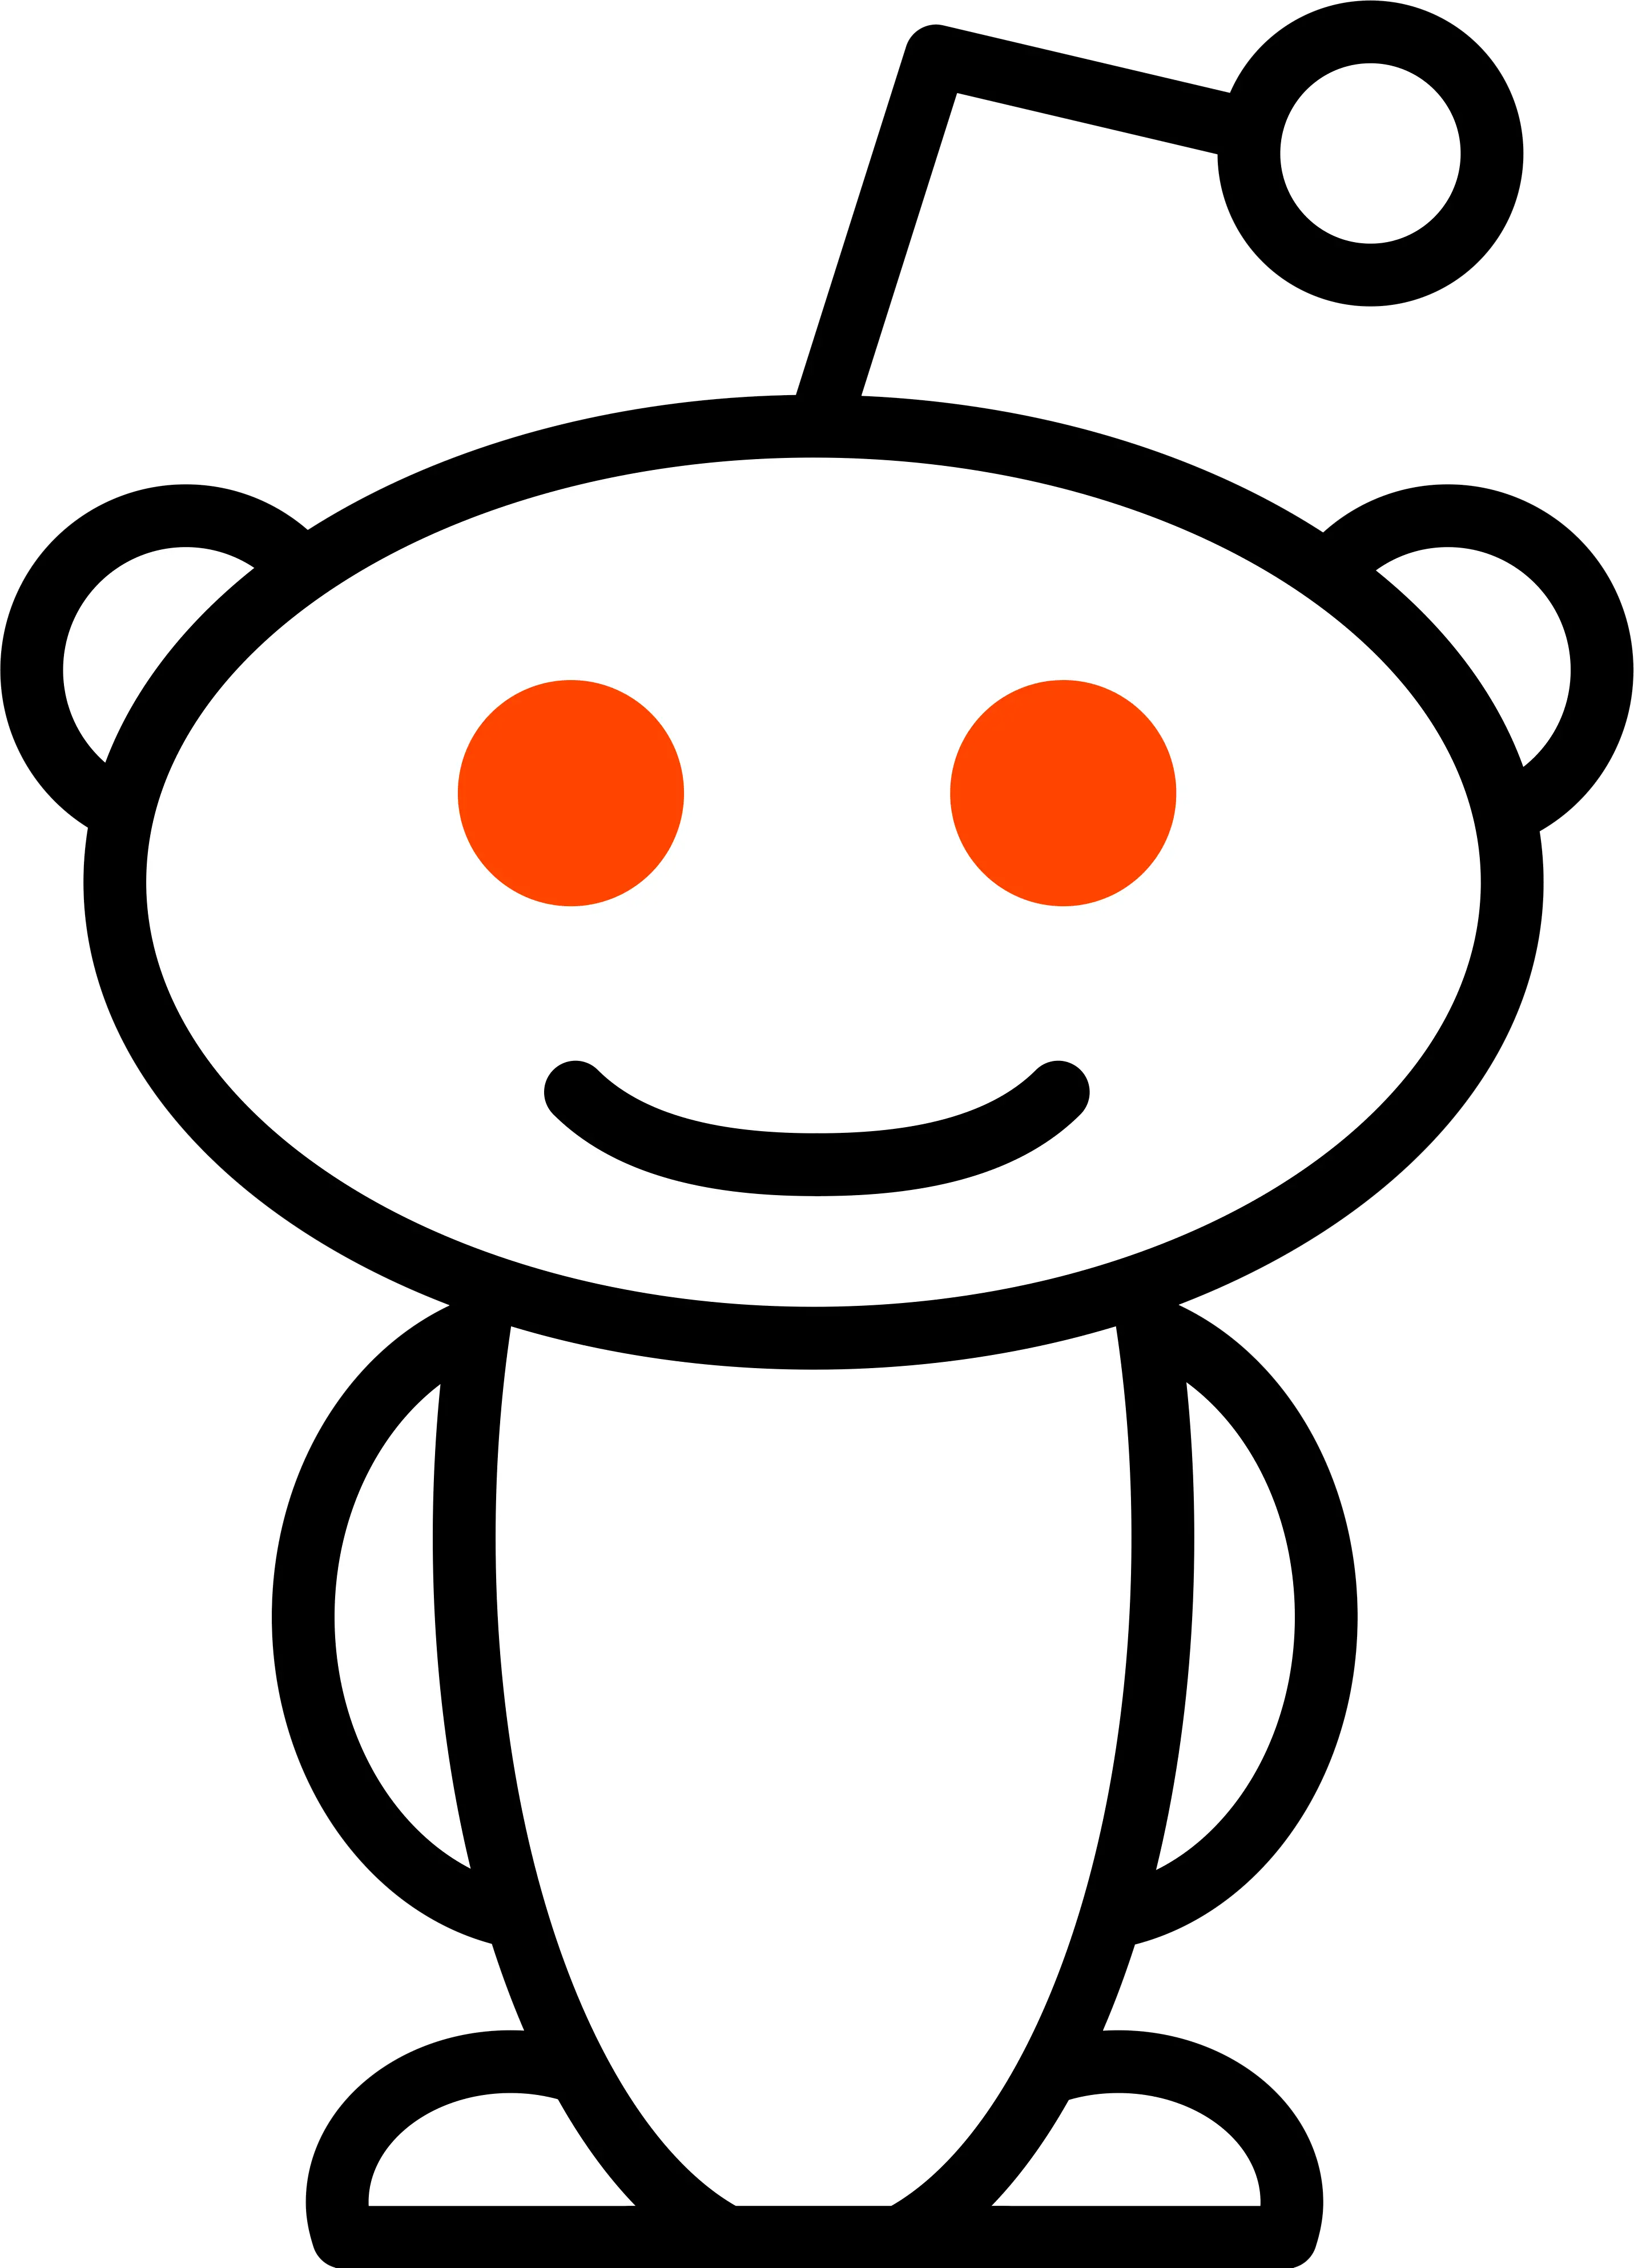 Reddit logo - for some reason we don't have an alt tag here